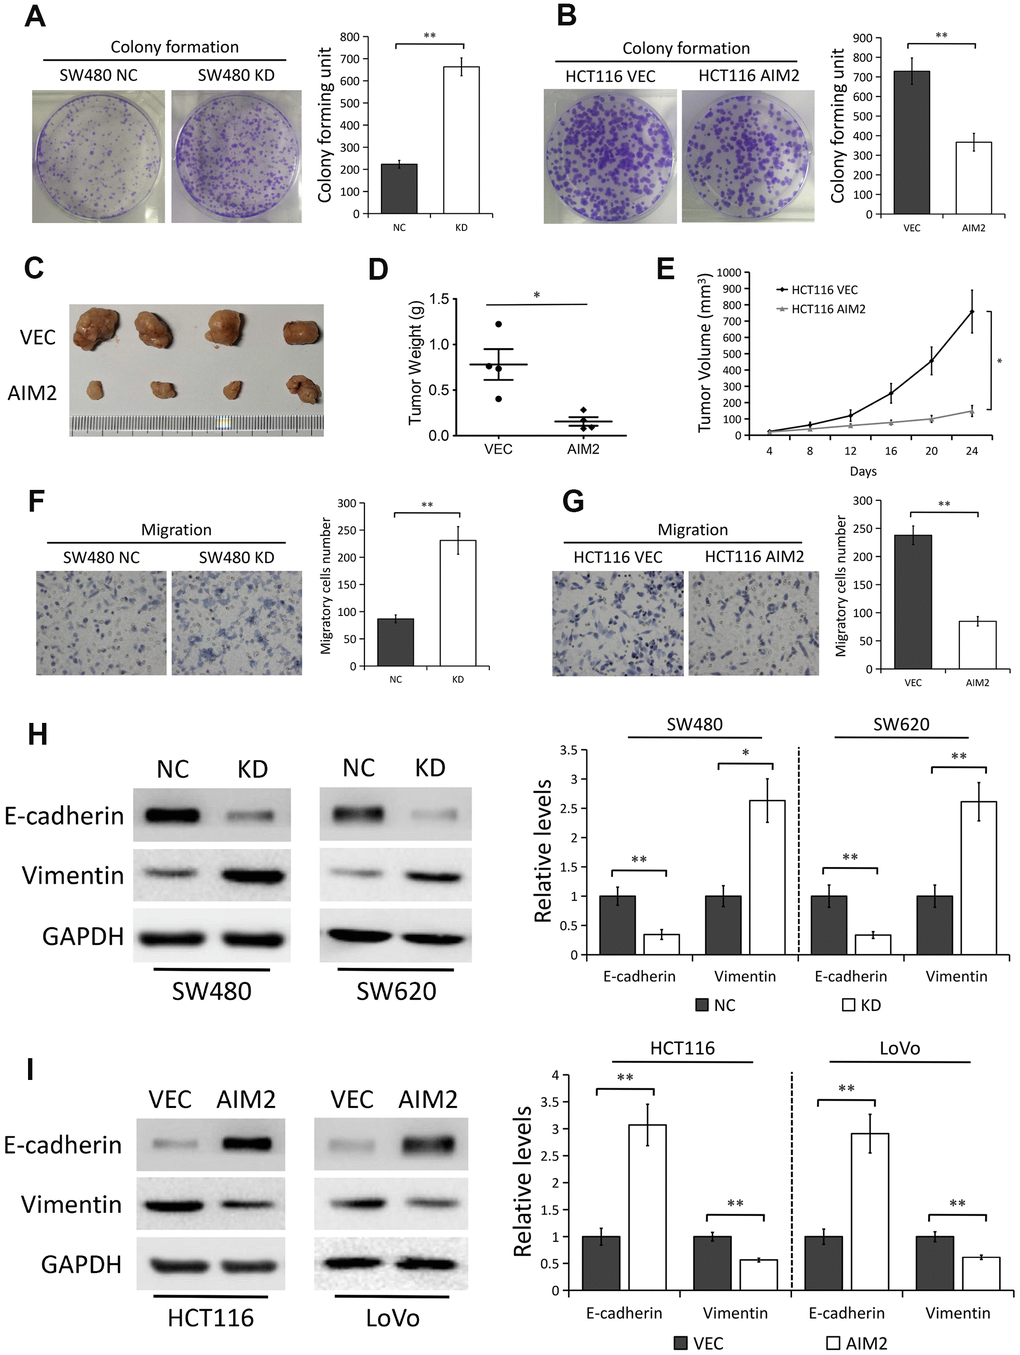 AIM2 plays anti-carcinogenic roles in CRC. (A) Colony formation assays to test viability of SW480 cells stably transfected with control-shRNA (NC) or shRNA against AIM2 (KD). Quantitative analysis results were presented as the mean±SEM (n=3). (B) Colony formation assays to test viability of HCT116 cells stably transfected with empty vector (VEC) or plasmid encoding human AIM2 (AIM2). Quantitative analysis results were presented as the mean±SEM (n=3). (C) Subcutaneous xenograft tumor growth in nude mice (4 per group) was measured and compared in HCT116 (VEC vs. AIM2) cell lines, and the representative image of tumors was shown. (D) Scatter plot analysis of tumor weight of each group was presented. (E) The volumes of the tumors measured every 4 days during the indicated period were shown. (F) Transwell assays to test migration ability of SW480 NC and KD cells. Quantitative analysis results were presented as the mean±SEM (n=3). (G) Transwell assays to test migration ability of HCT116 VEC and AIM2 cells. Quantitative analysis results were presented as the mean±SEM (n=3). (H) Western blots of E-cadherin and Vimentin protein in SW480 and SW620 cells stably transfected with control-shRNA (NC) or shRNA against AIM2 (KD). GAPDH as a loading control. Each experiment was performed at least triplicate and the bands were quantified and presented as the mean±SEM. (I) Western blots of E-cadherin and Vimentin protein in HCT116 and LoVo cells stably transfected with empty vector (VEC) or plasmid encoding human AIM2 (AIM2). GAPDH as a loading control. Each experiment was performed at least triplicate and the bands were quantified and presented as the mean±SEM. *P